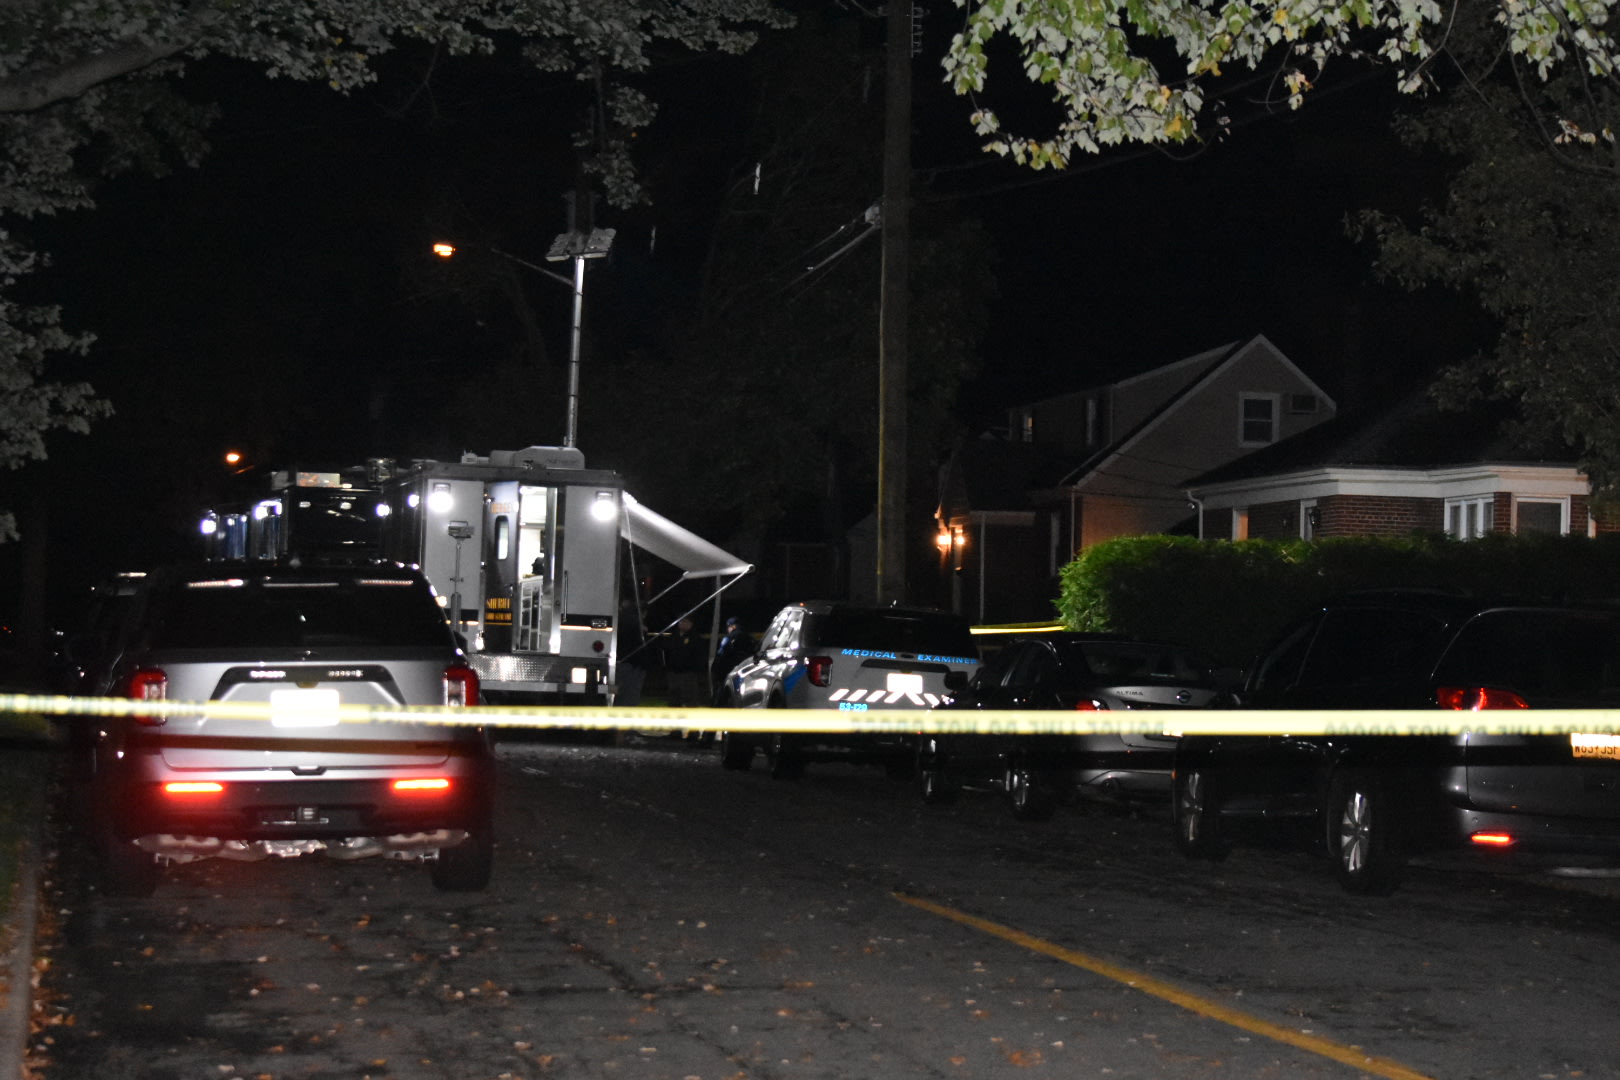 Tragic Discovery in New Jersey Home: Authorities Investigate Double Homicide